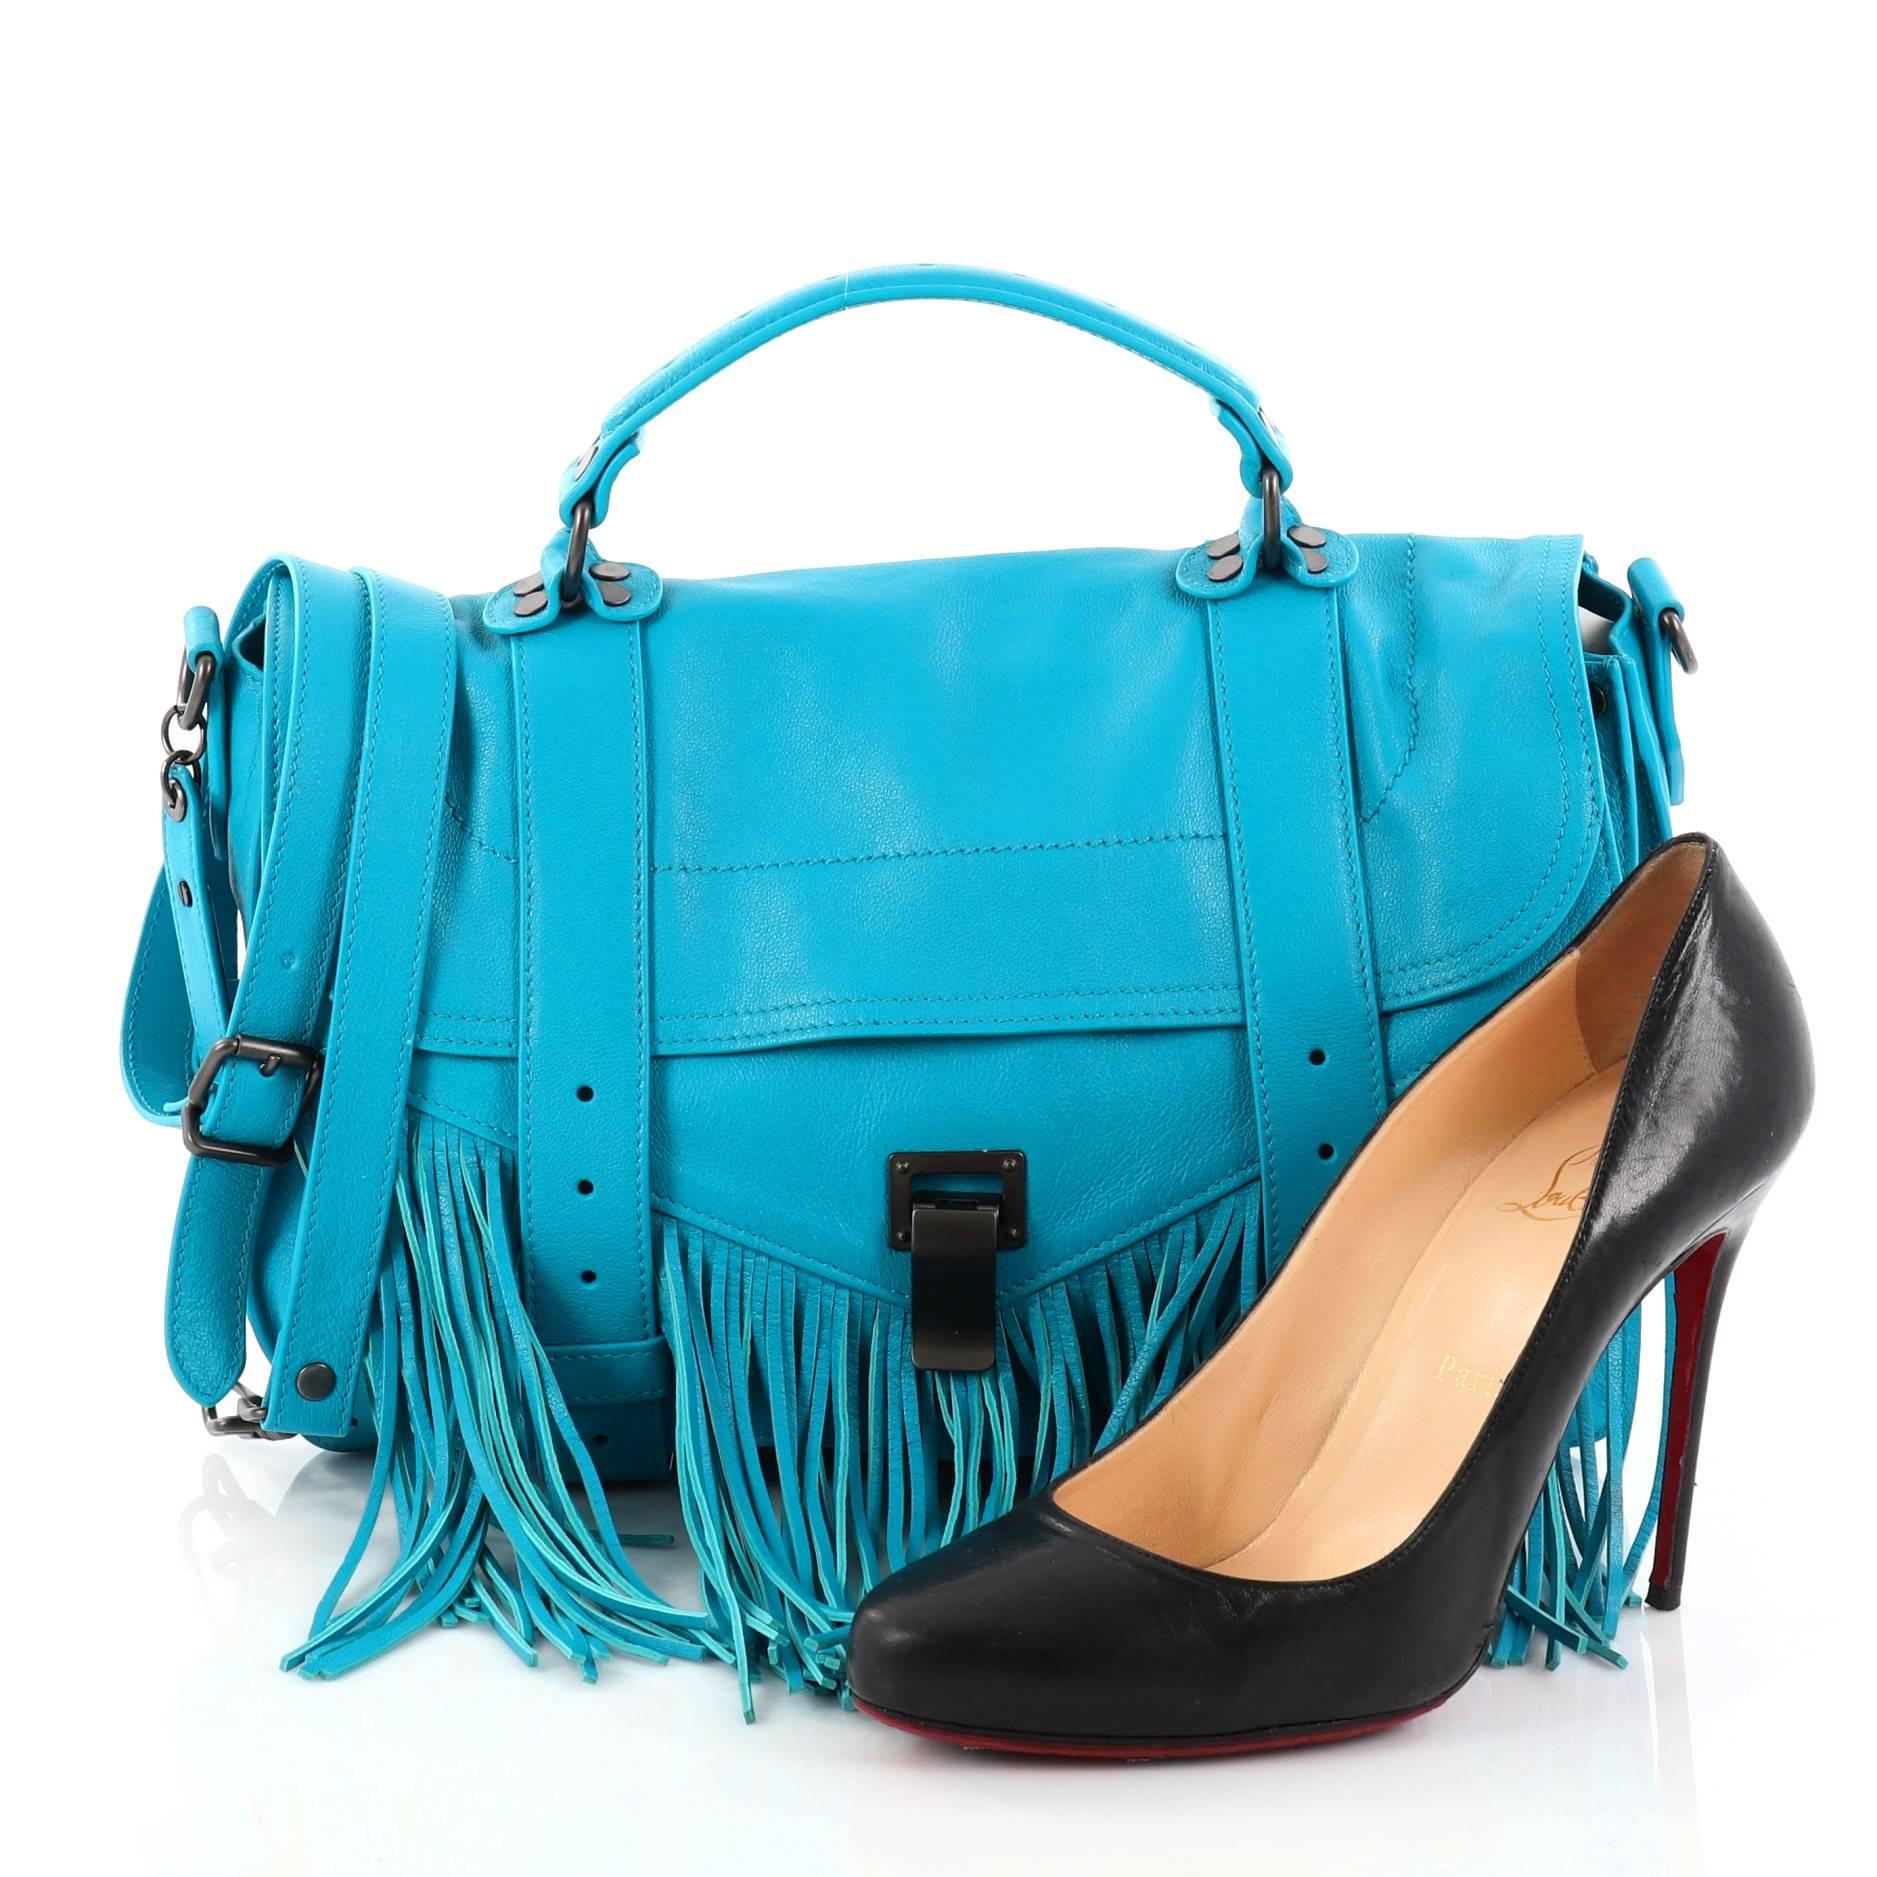 This authentic Proenza Schouler PS1 Fringe Handbag Leather Medium mixes the brand's iconic It bag with vintage-inspired styling made for modern fashionistas. Constructed in blue leather, this stylish satchel features flat top handle, cascading